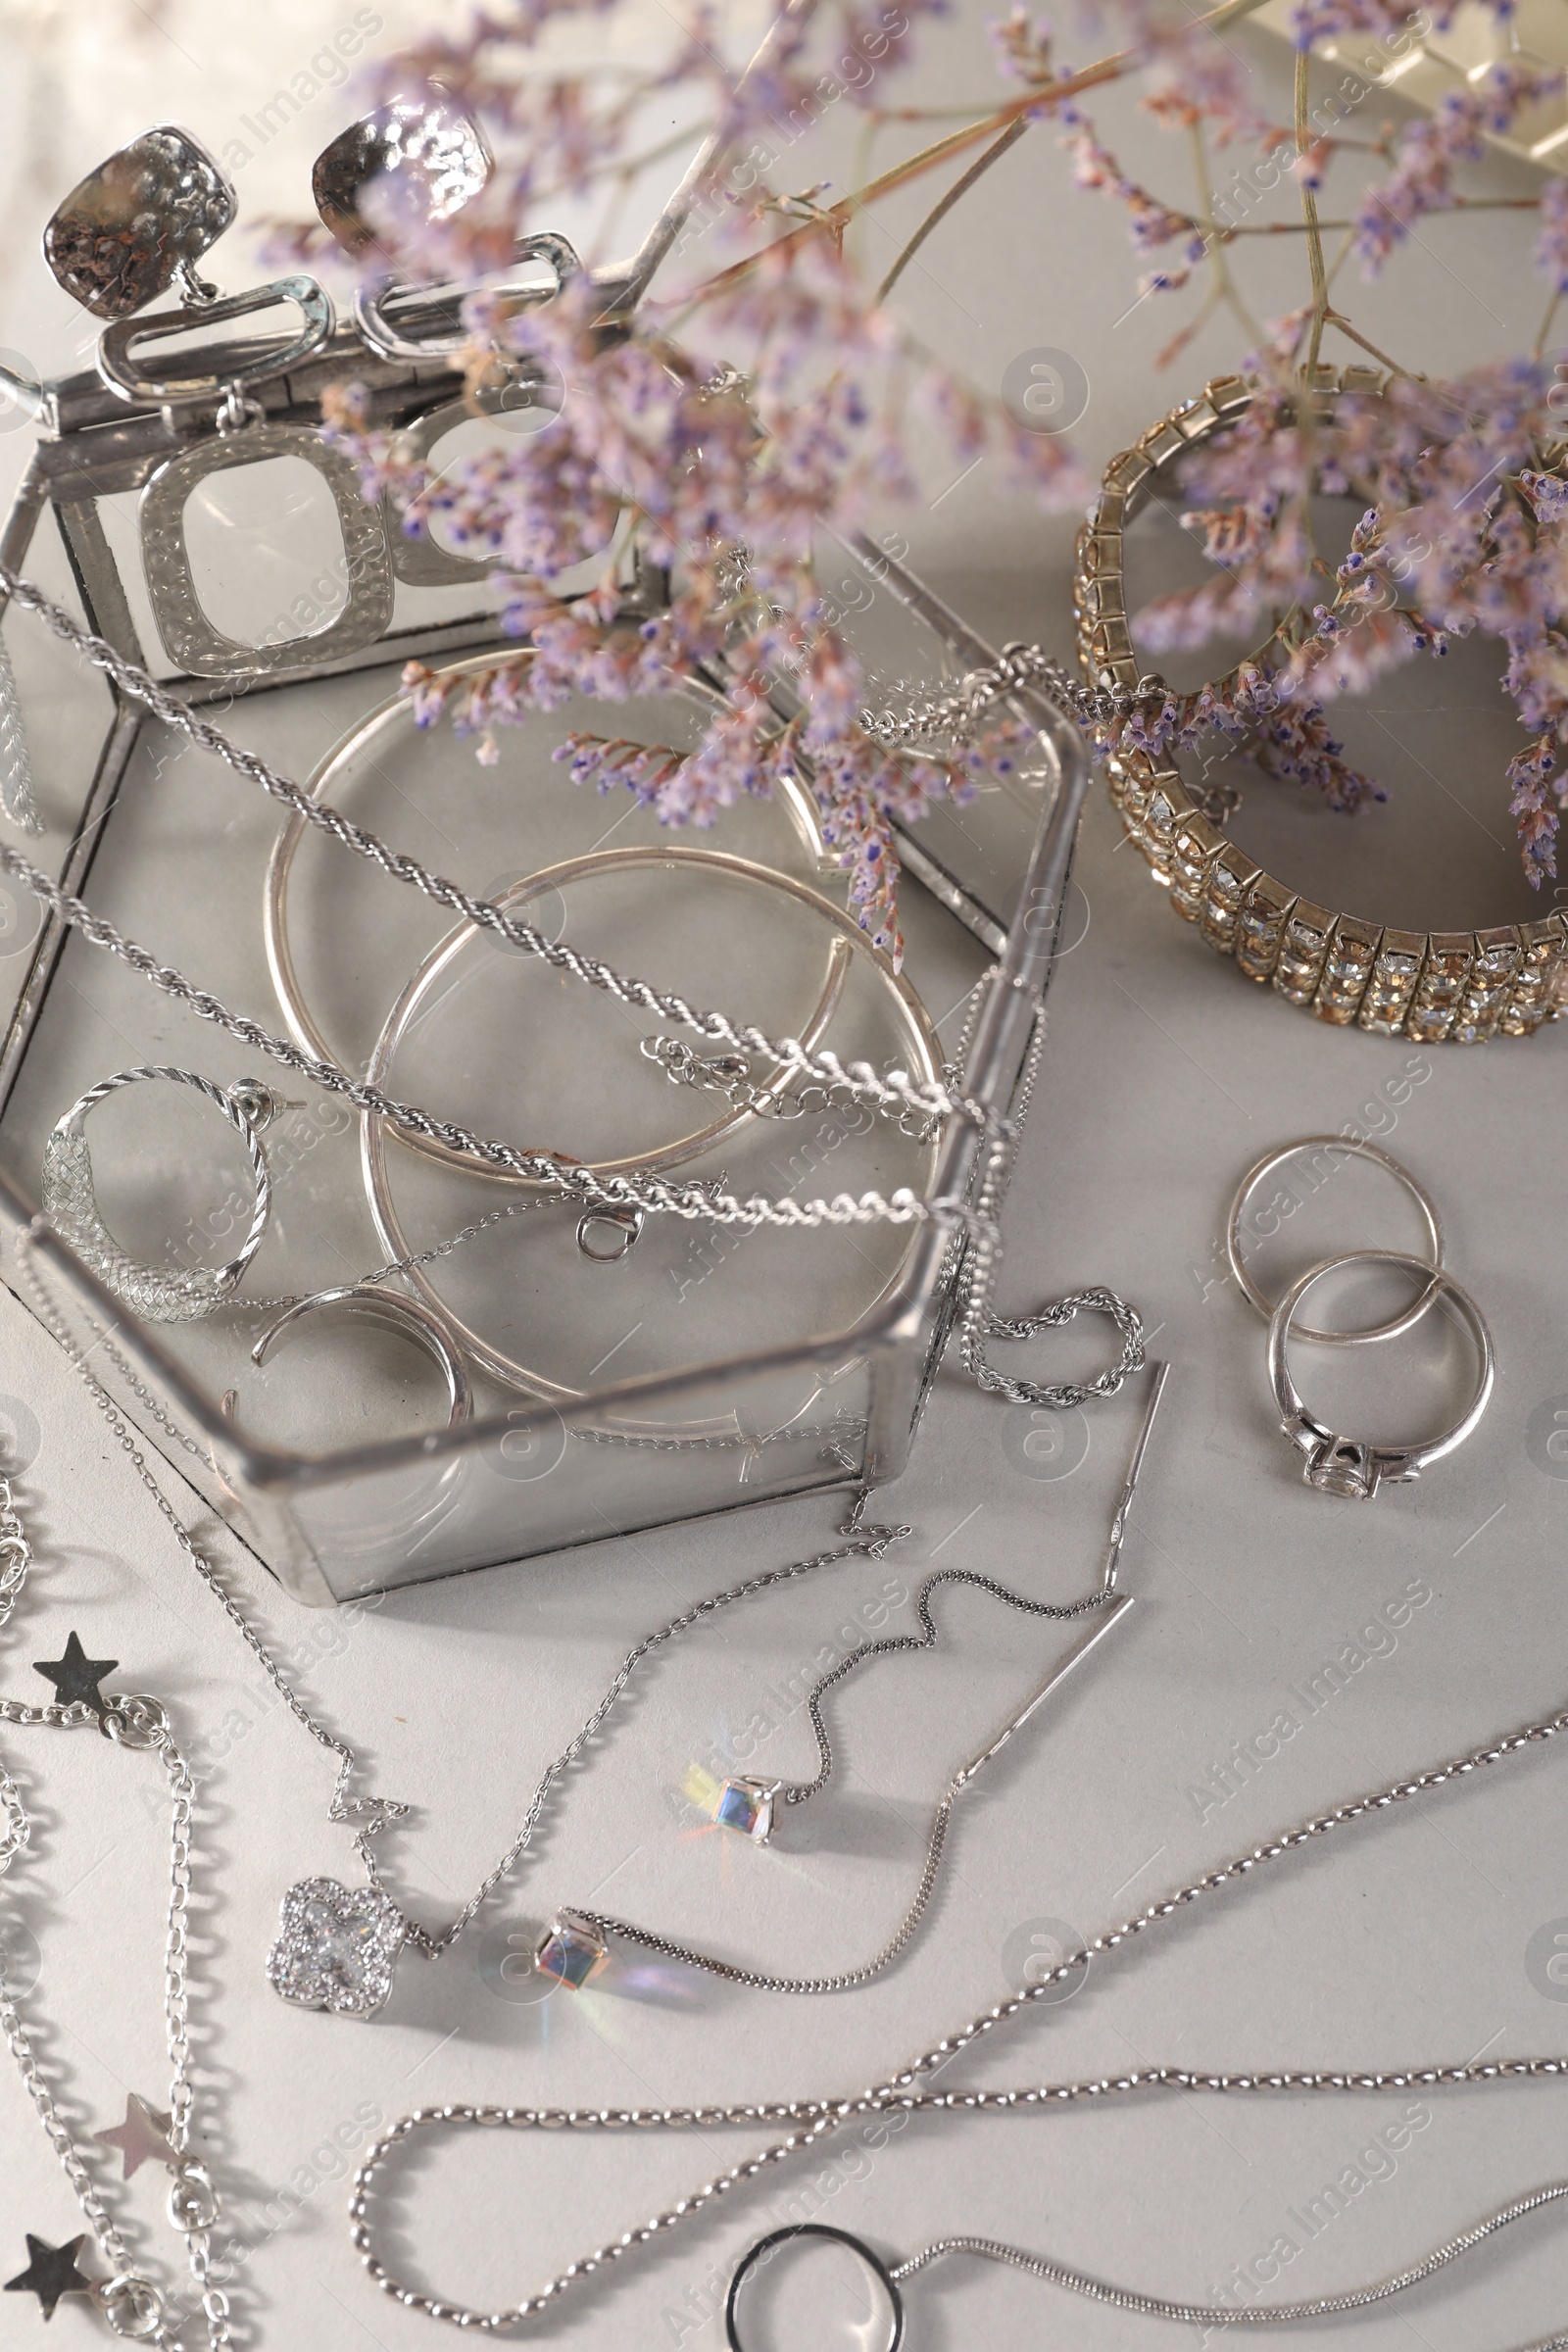 Photo of Metal chains and other different accessories on light table, above view. Luxury jewelry